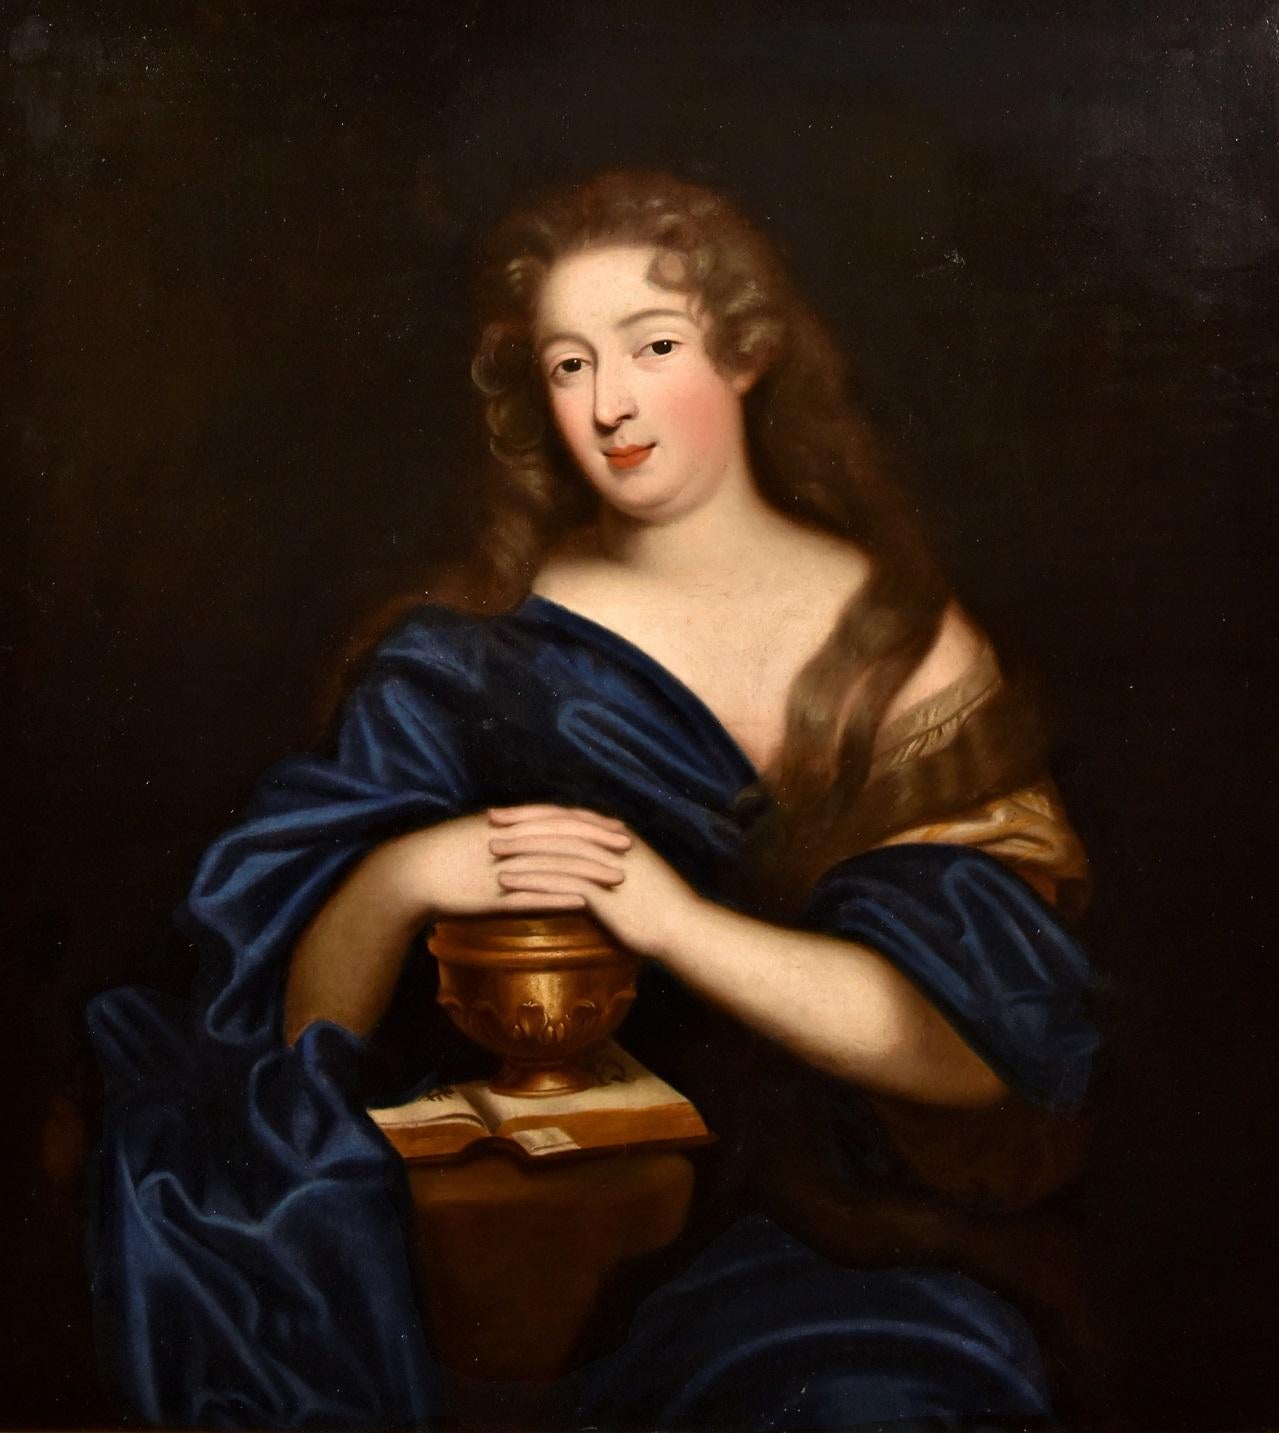 Portrait Mignard Paint Oil on canvsa Old master 17th Century French Lady Woman - Painting by Pierre Mignard, known as Le Romain (Troyes 1612 - Paris 1695)